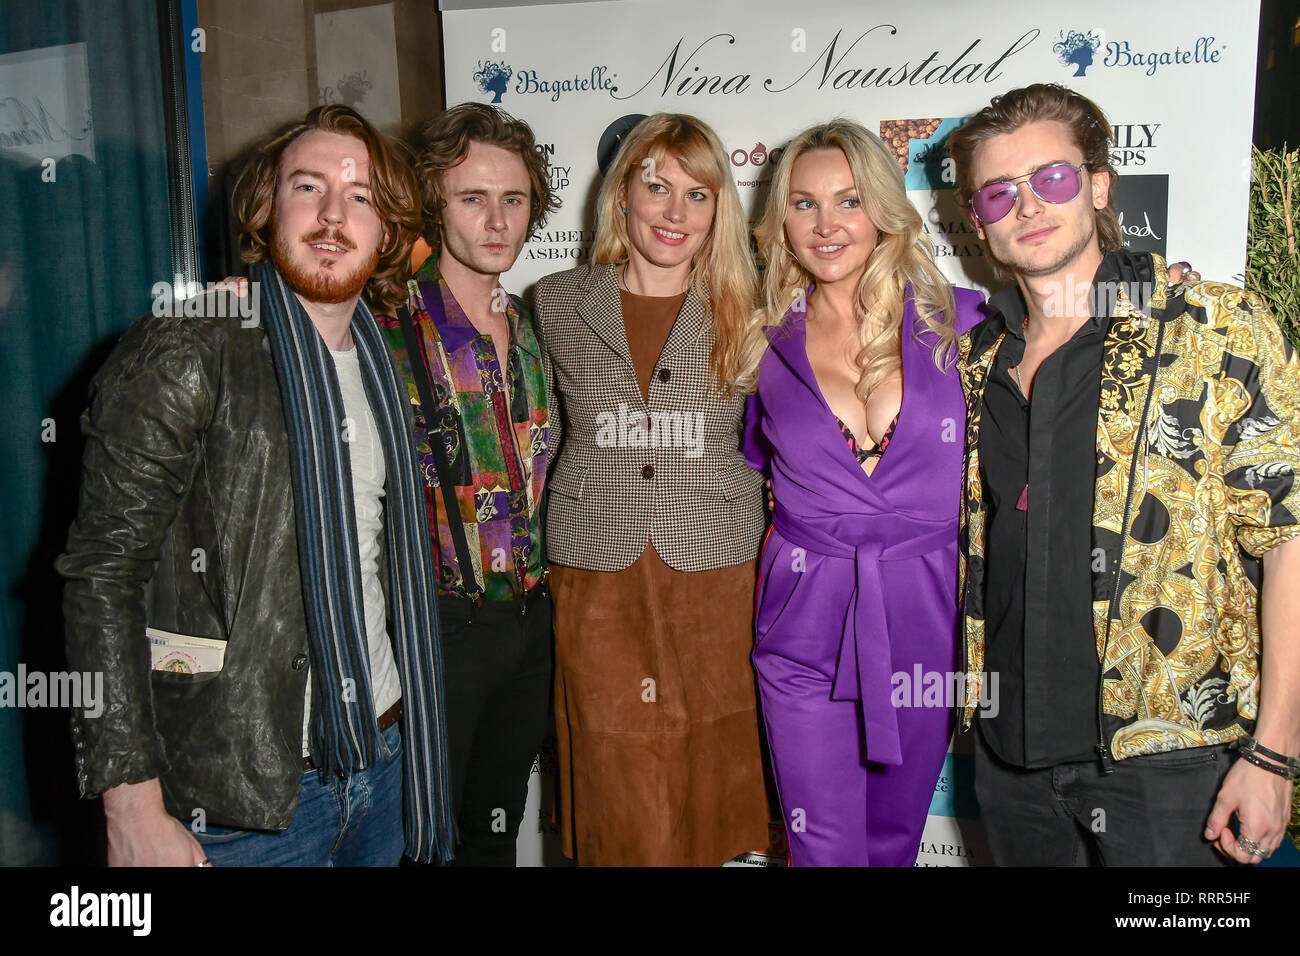 London, UK. 26th Feb 2019. Guest,Ben Luke Jones, Meredith Ostrom, Heather Bird tchenguiz and Jack McEvoy Arrivers at Nina Naustdal catwalk show SS19/20 collection by The London School of Beauty & Make-up at Bagatelle on 26 Feb 2019, London, UK. Credit: Picture Capital/Alamy Live News Stock Photo